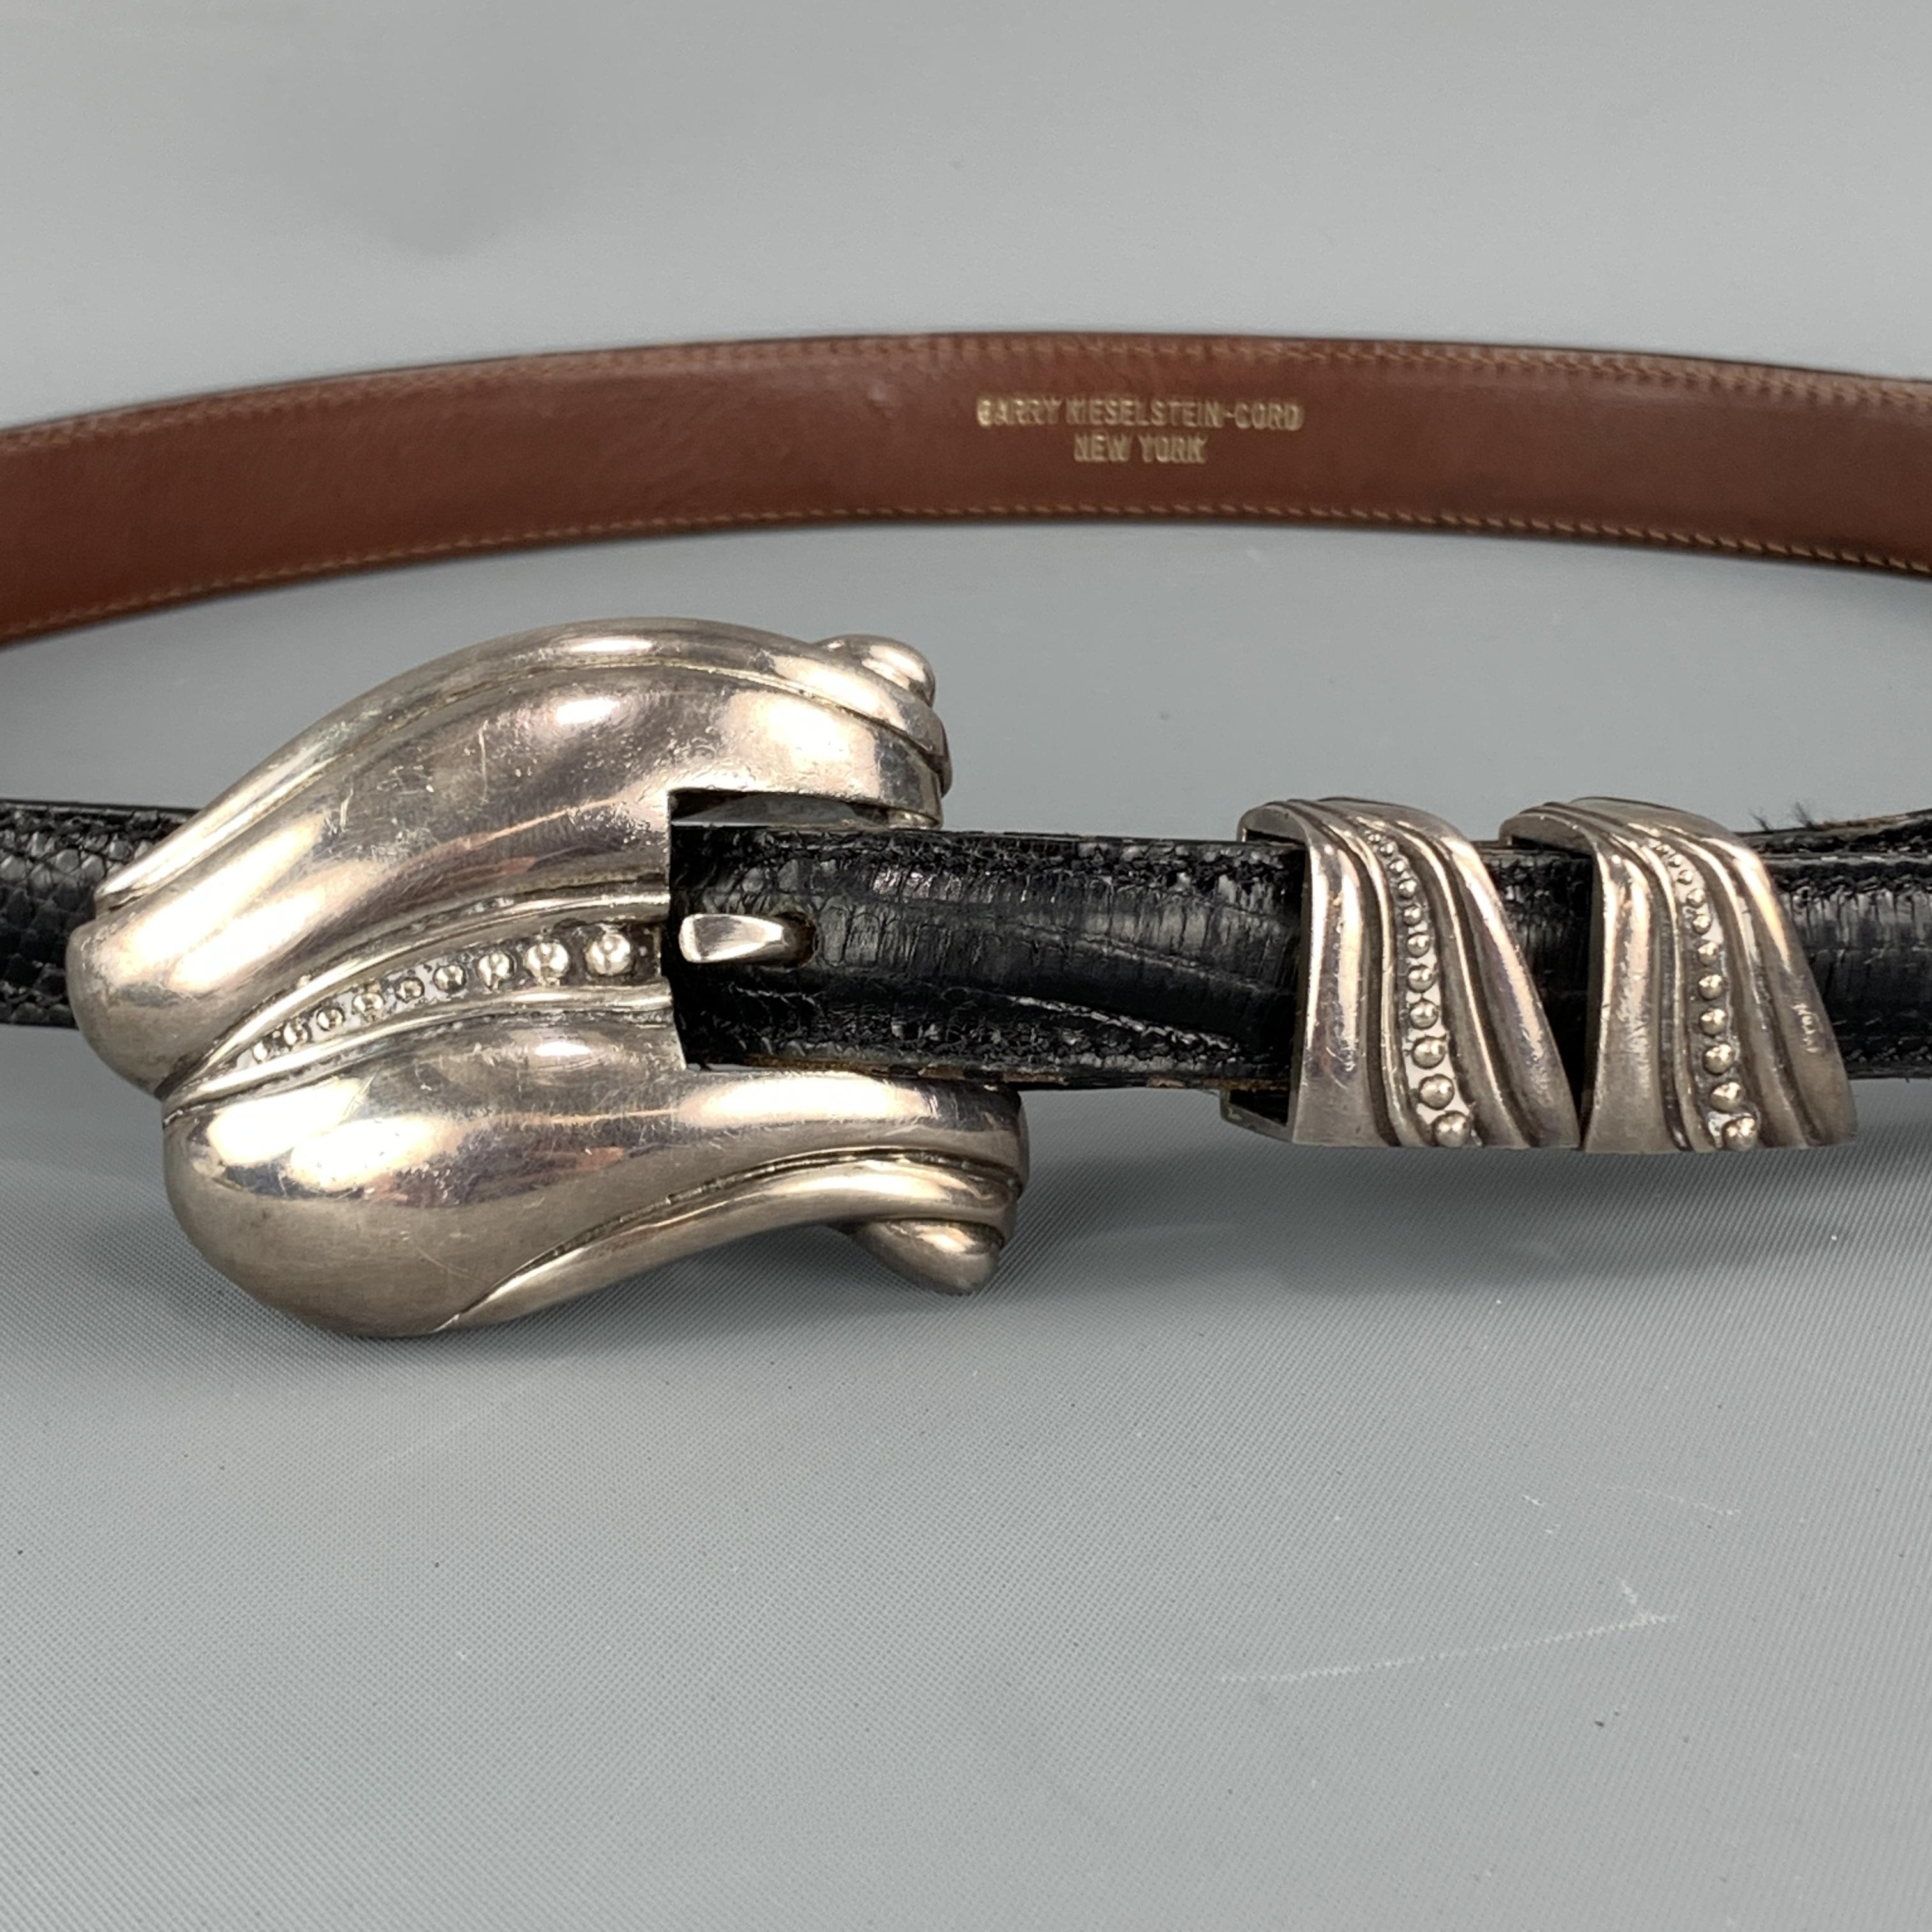 Vintage KIESELSTEIN-CORD Western belt features a black lizard leather strap with sterling silver buckle and details. Wear throughout. As-is. 

Good Pre-Owned Condition.
Marked: B

Length: 40 in.
Width: 0.75 in.
Fits: 26.5-30.5 in.
Buckle: 2.5 x 1.75